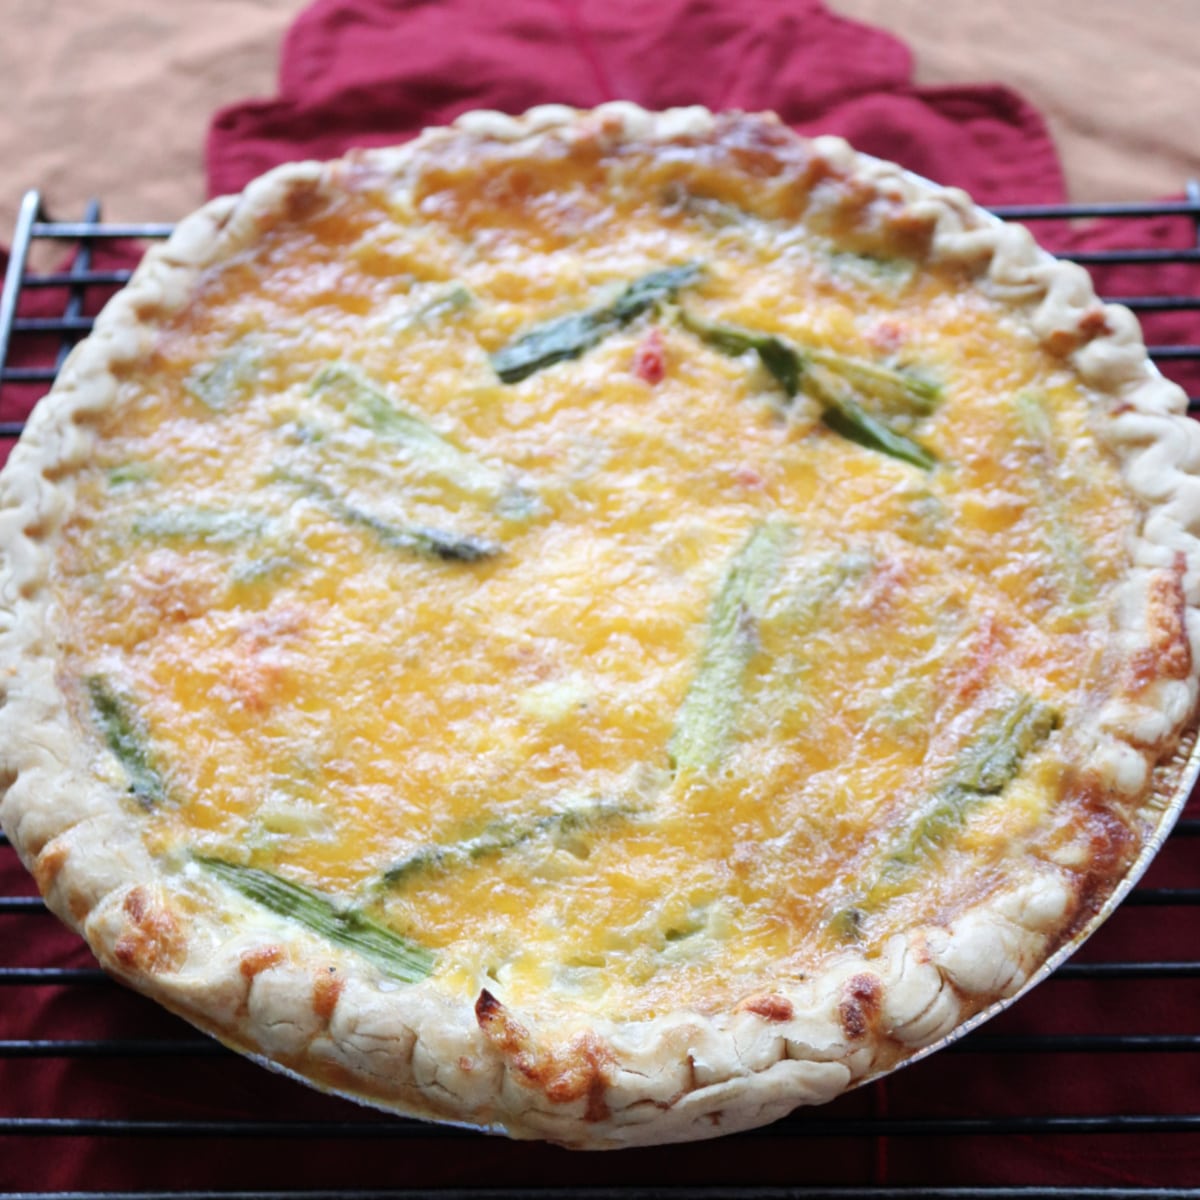 Whole asparagus and red pepper quiche on a cooling rack.